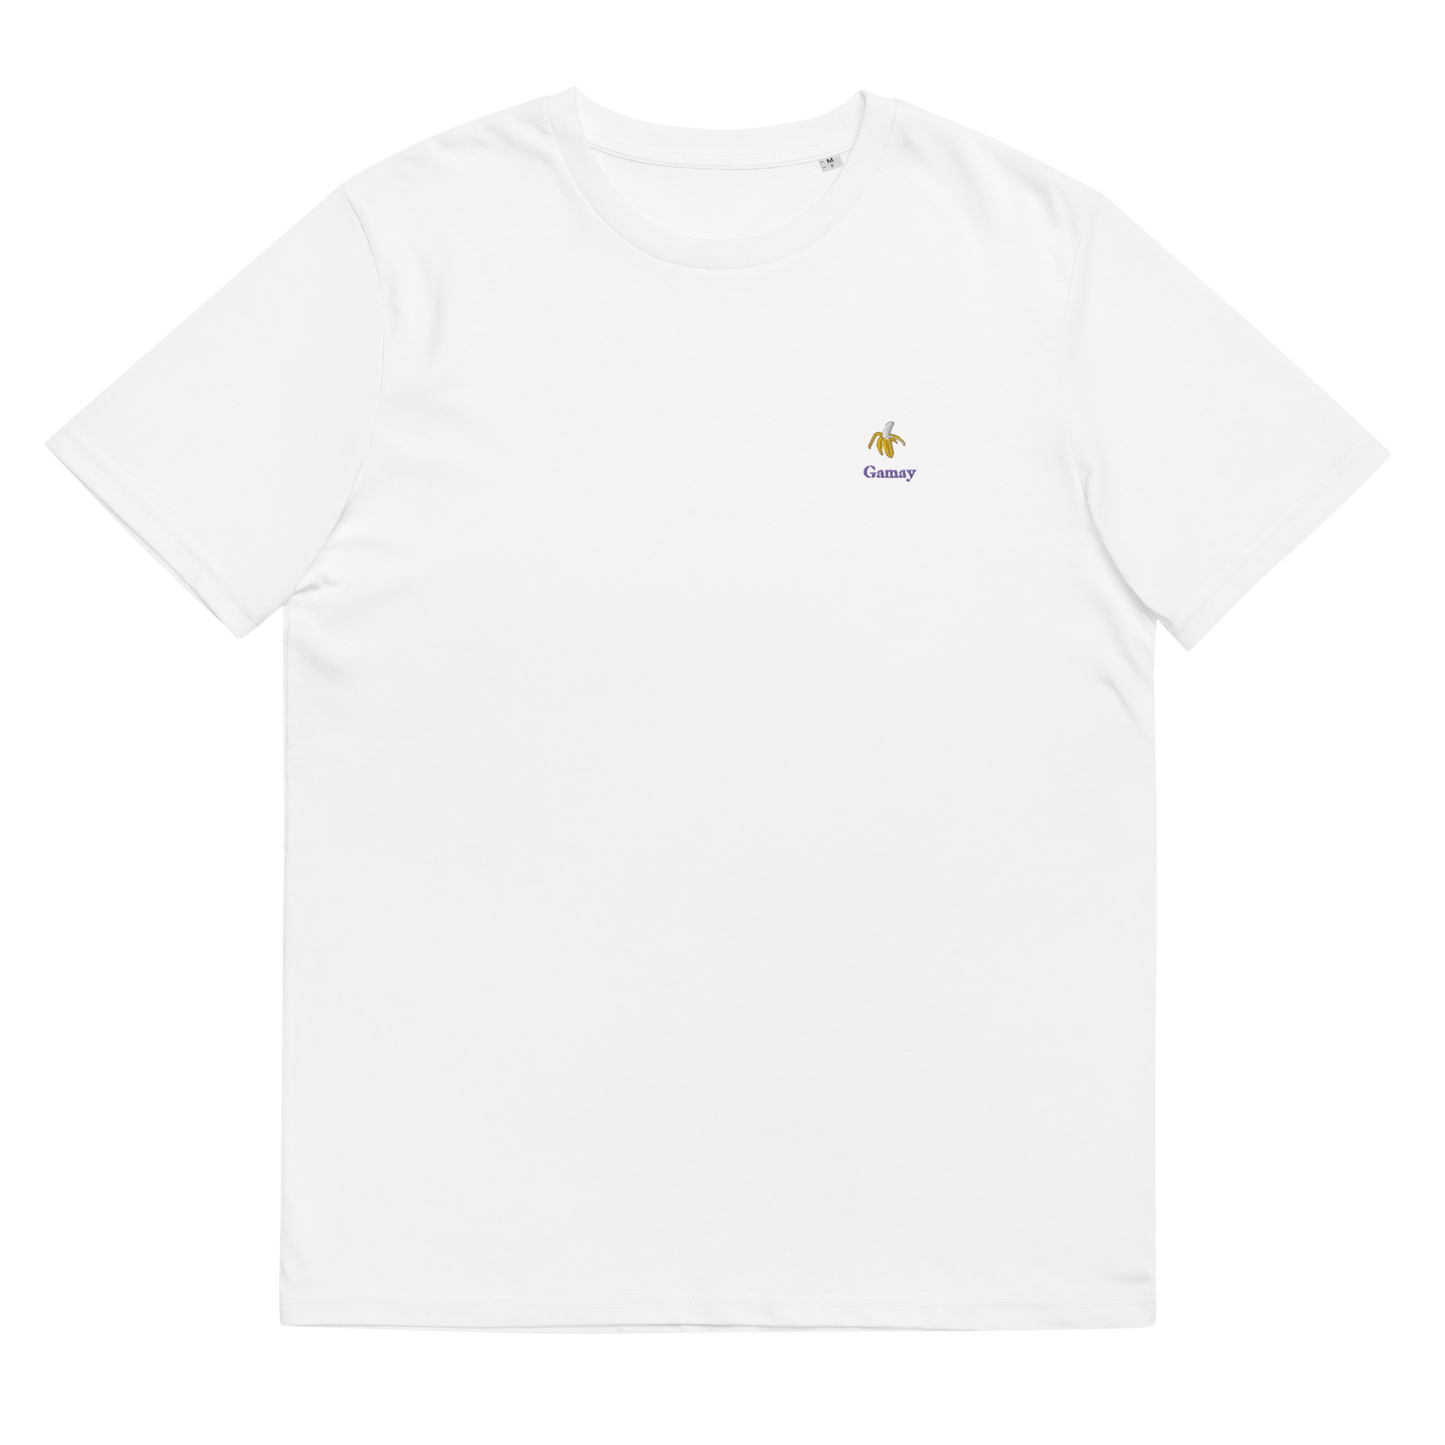 Gamay white embroidered t-shirt